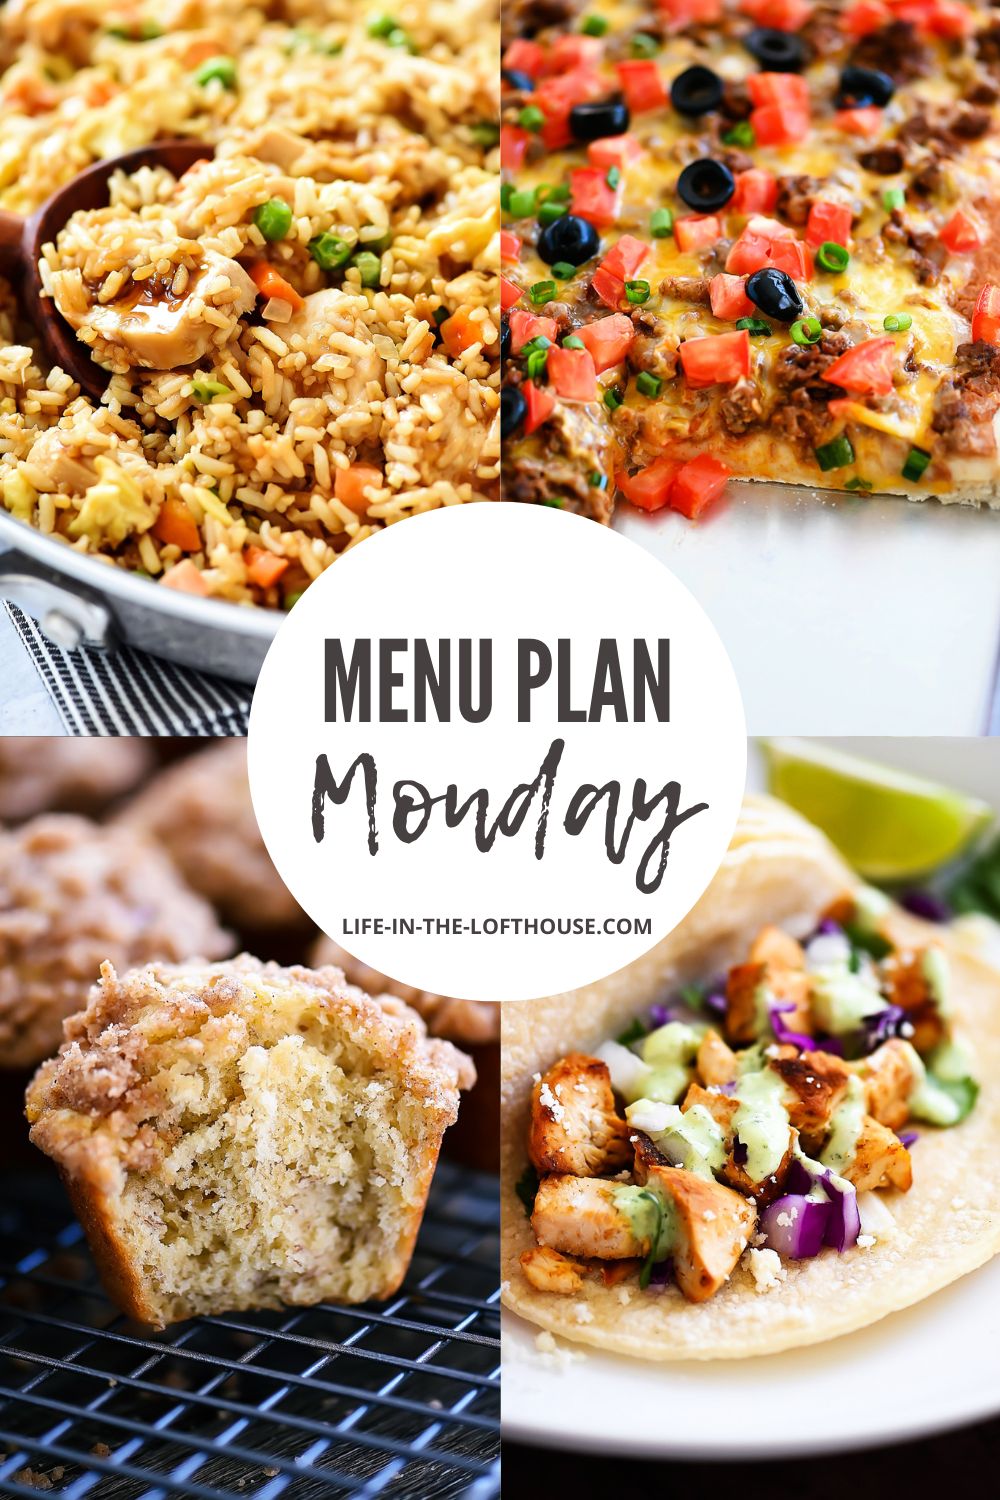 Menu Plan Monday is a weekly menu filled with delicious dinner recipes. All of the recipes are easy to follow and great for busy weeknights!